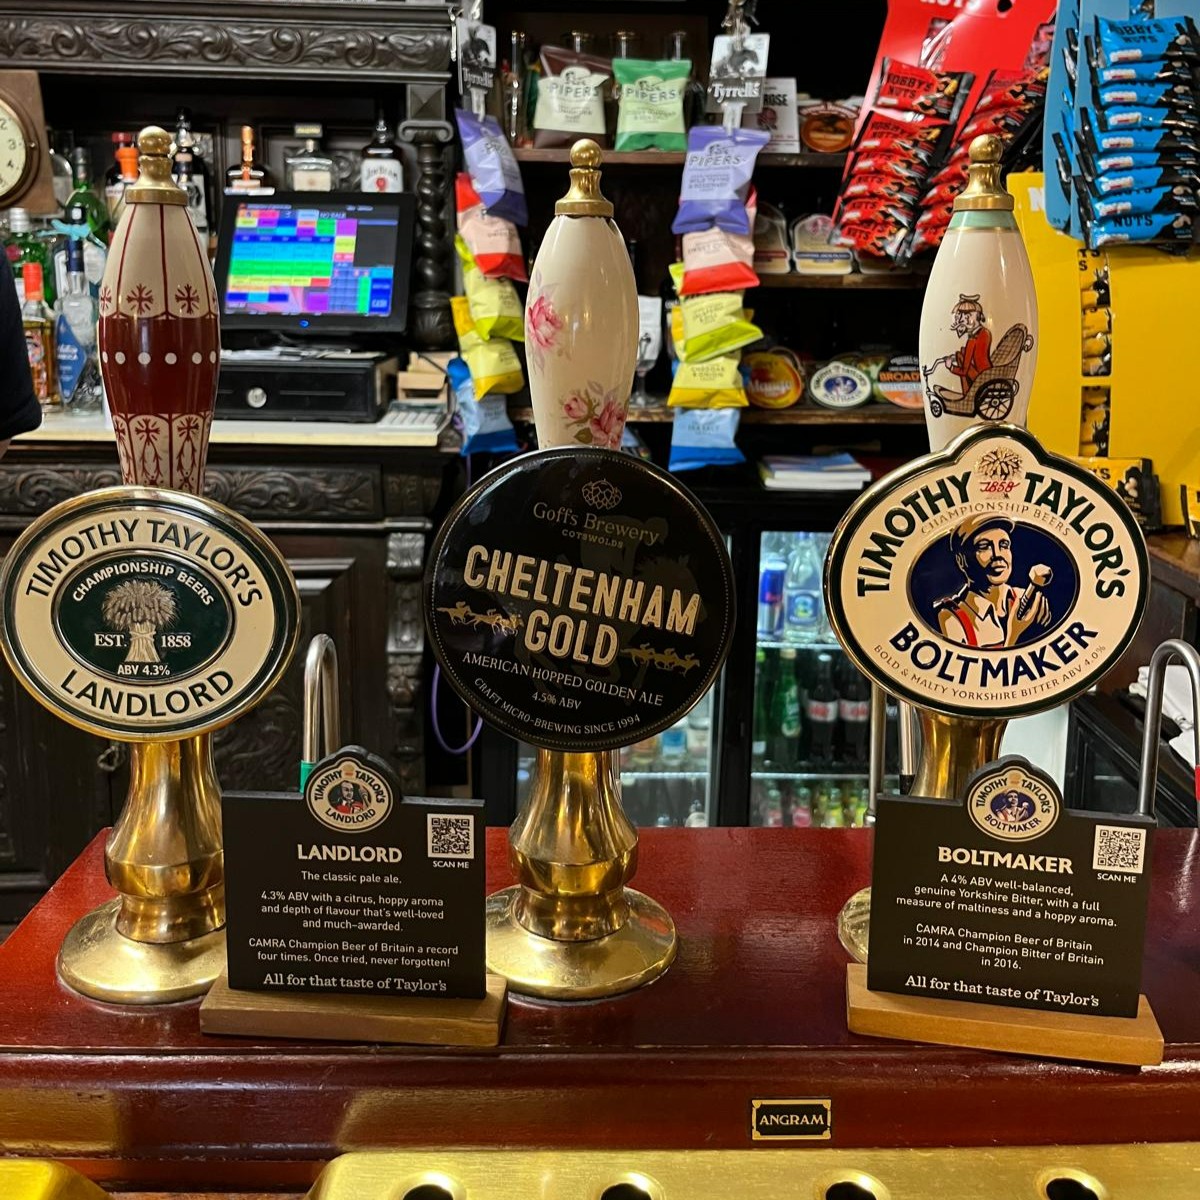 Landlord is now joined by Boltmaker at the beautiful Crown and Trumpet Inn, Broadway. Both are being looked after superbly well. Check out their retro Landlord pump clip.